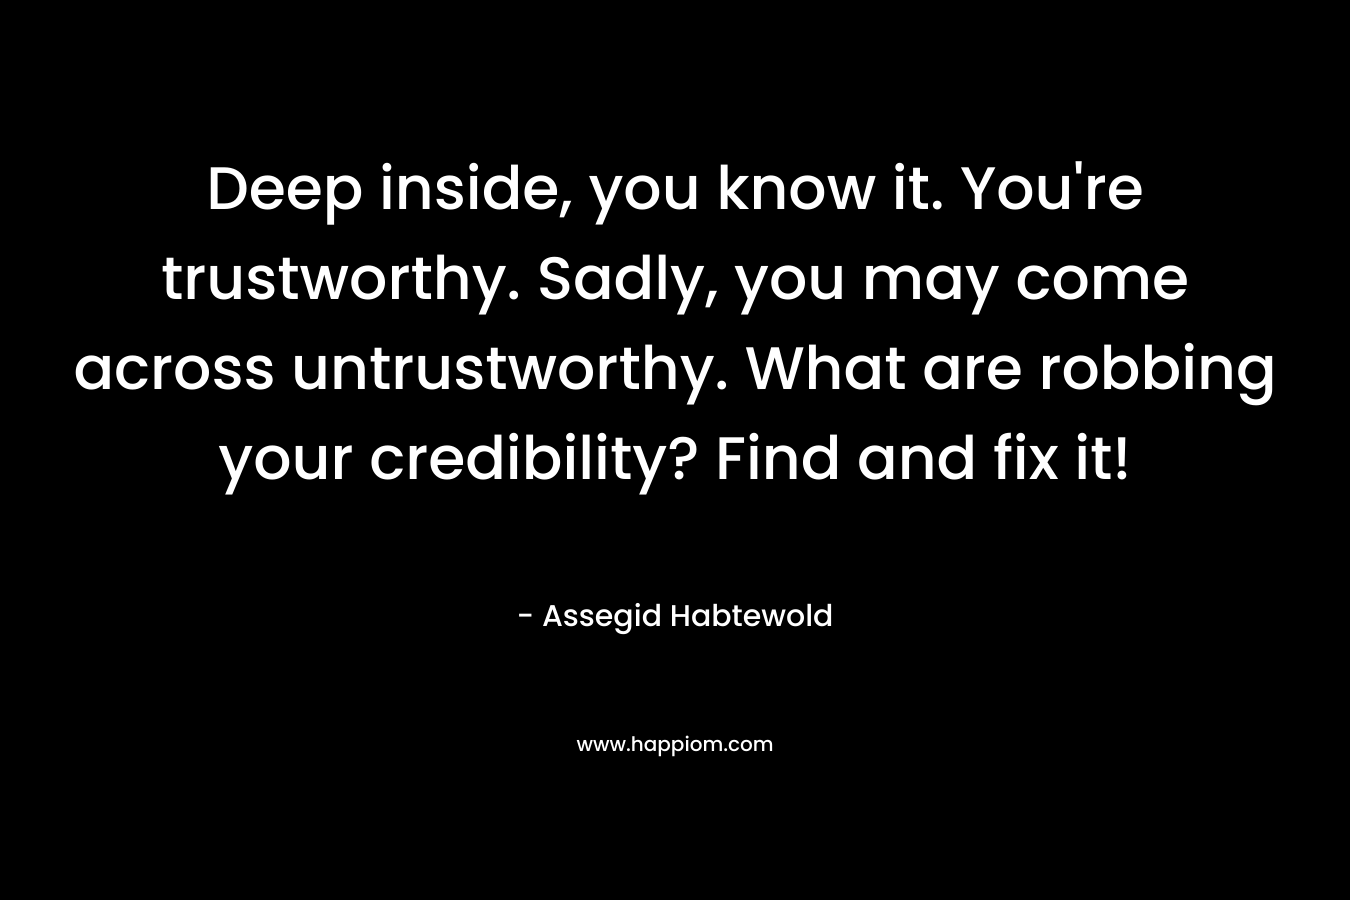 Deep inside, you know it. You’re trustworthy. Sadly, you may come across untrustworthy. What are robbing your credibility? Find and fix it! – Assegid Habtewold